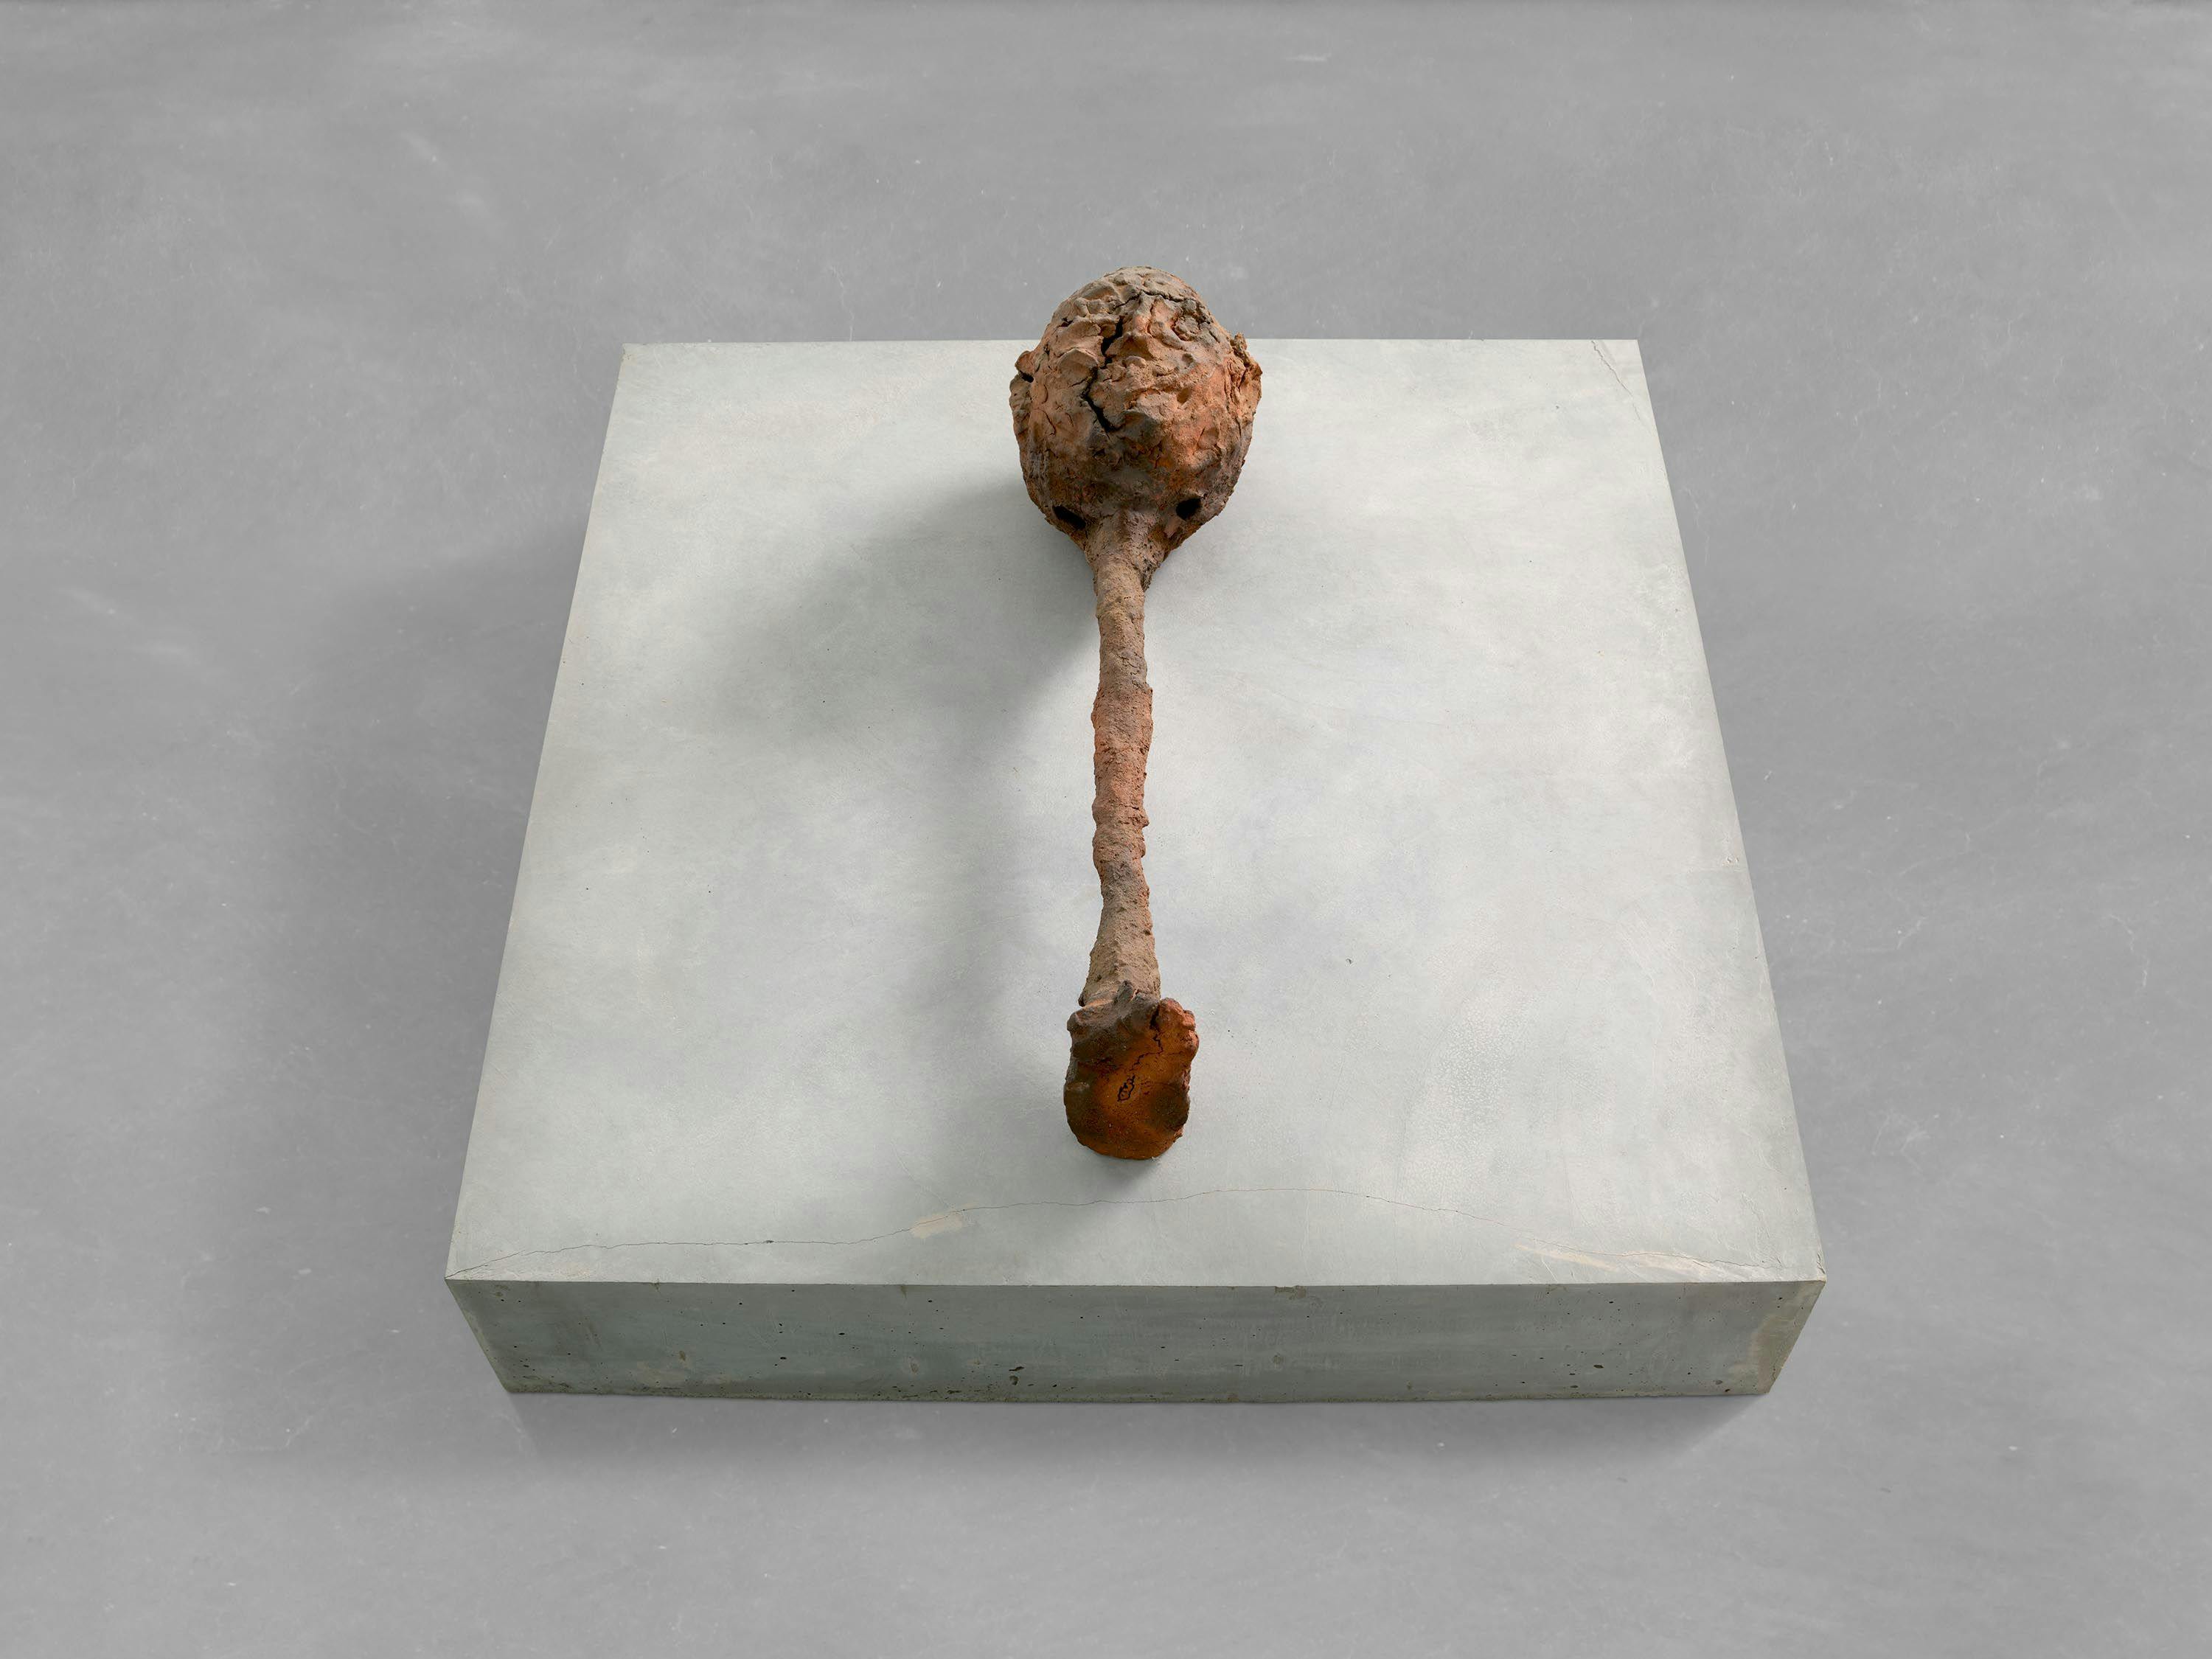 An untitled sculpture by Huma Bhabha, dated 2022.